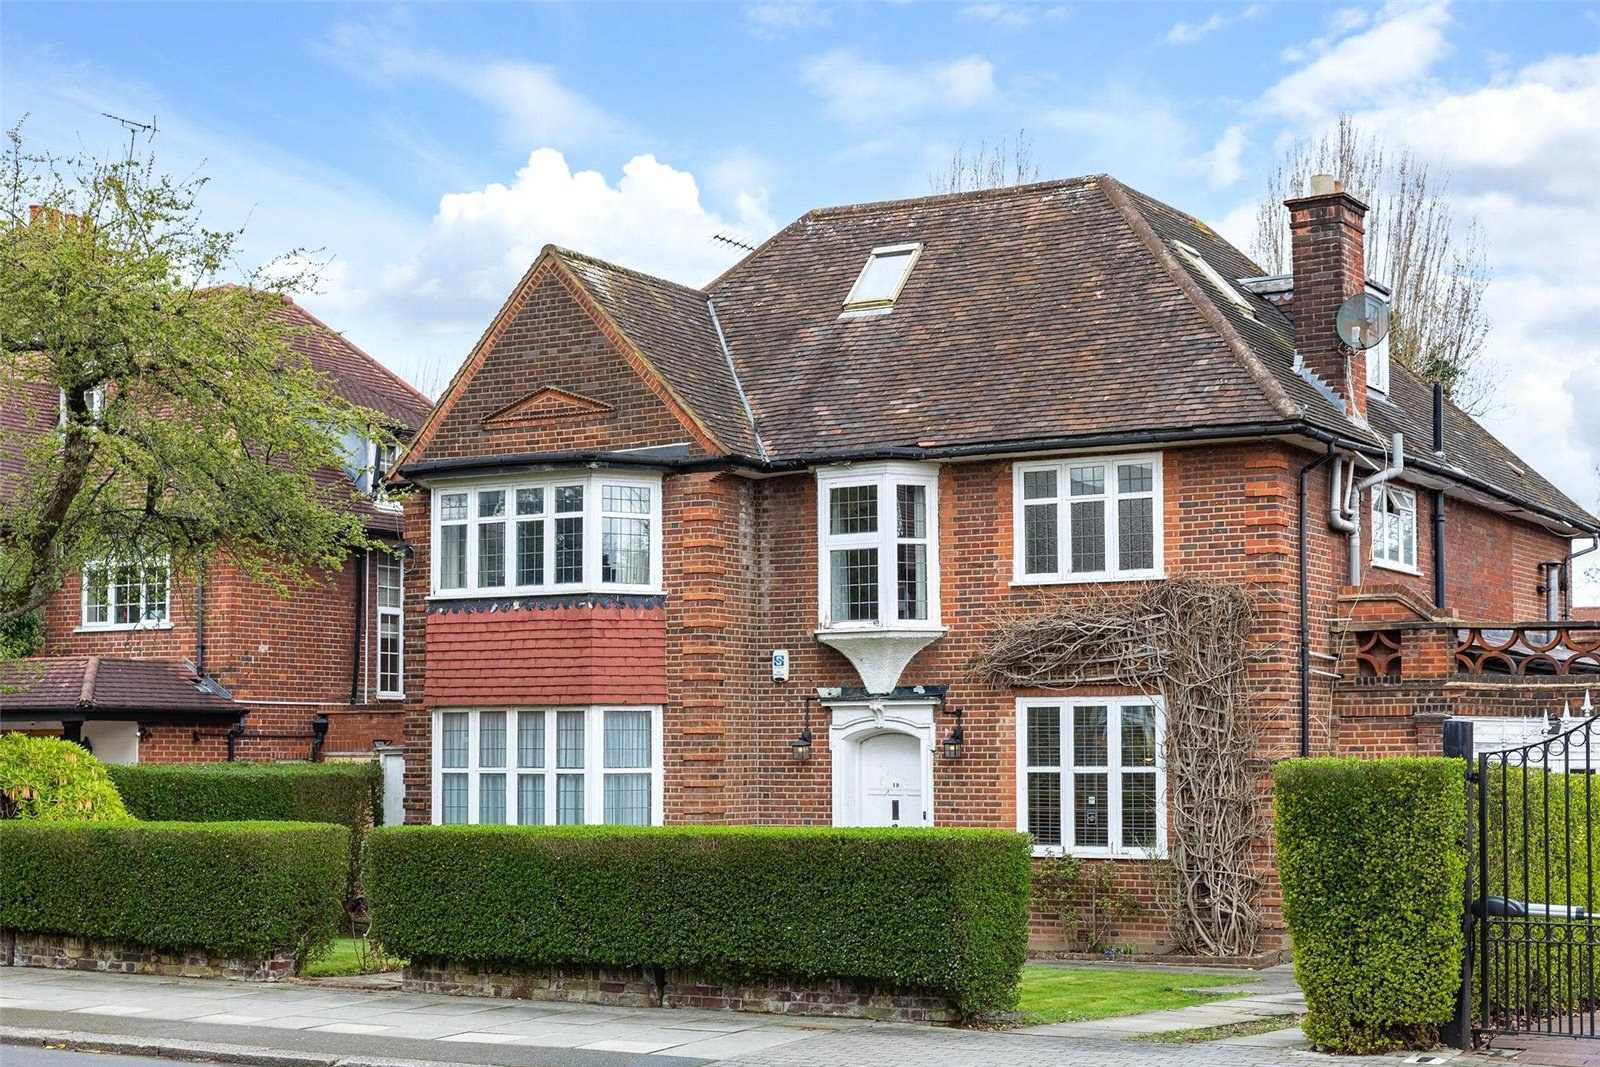 House in Cricklewood, Hocroft Avenue 12314049